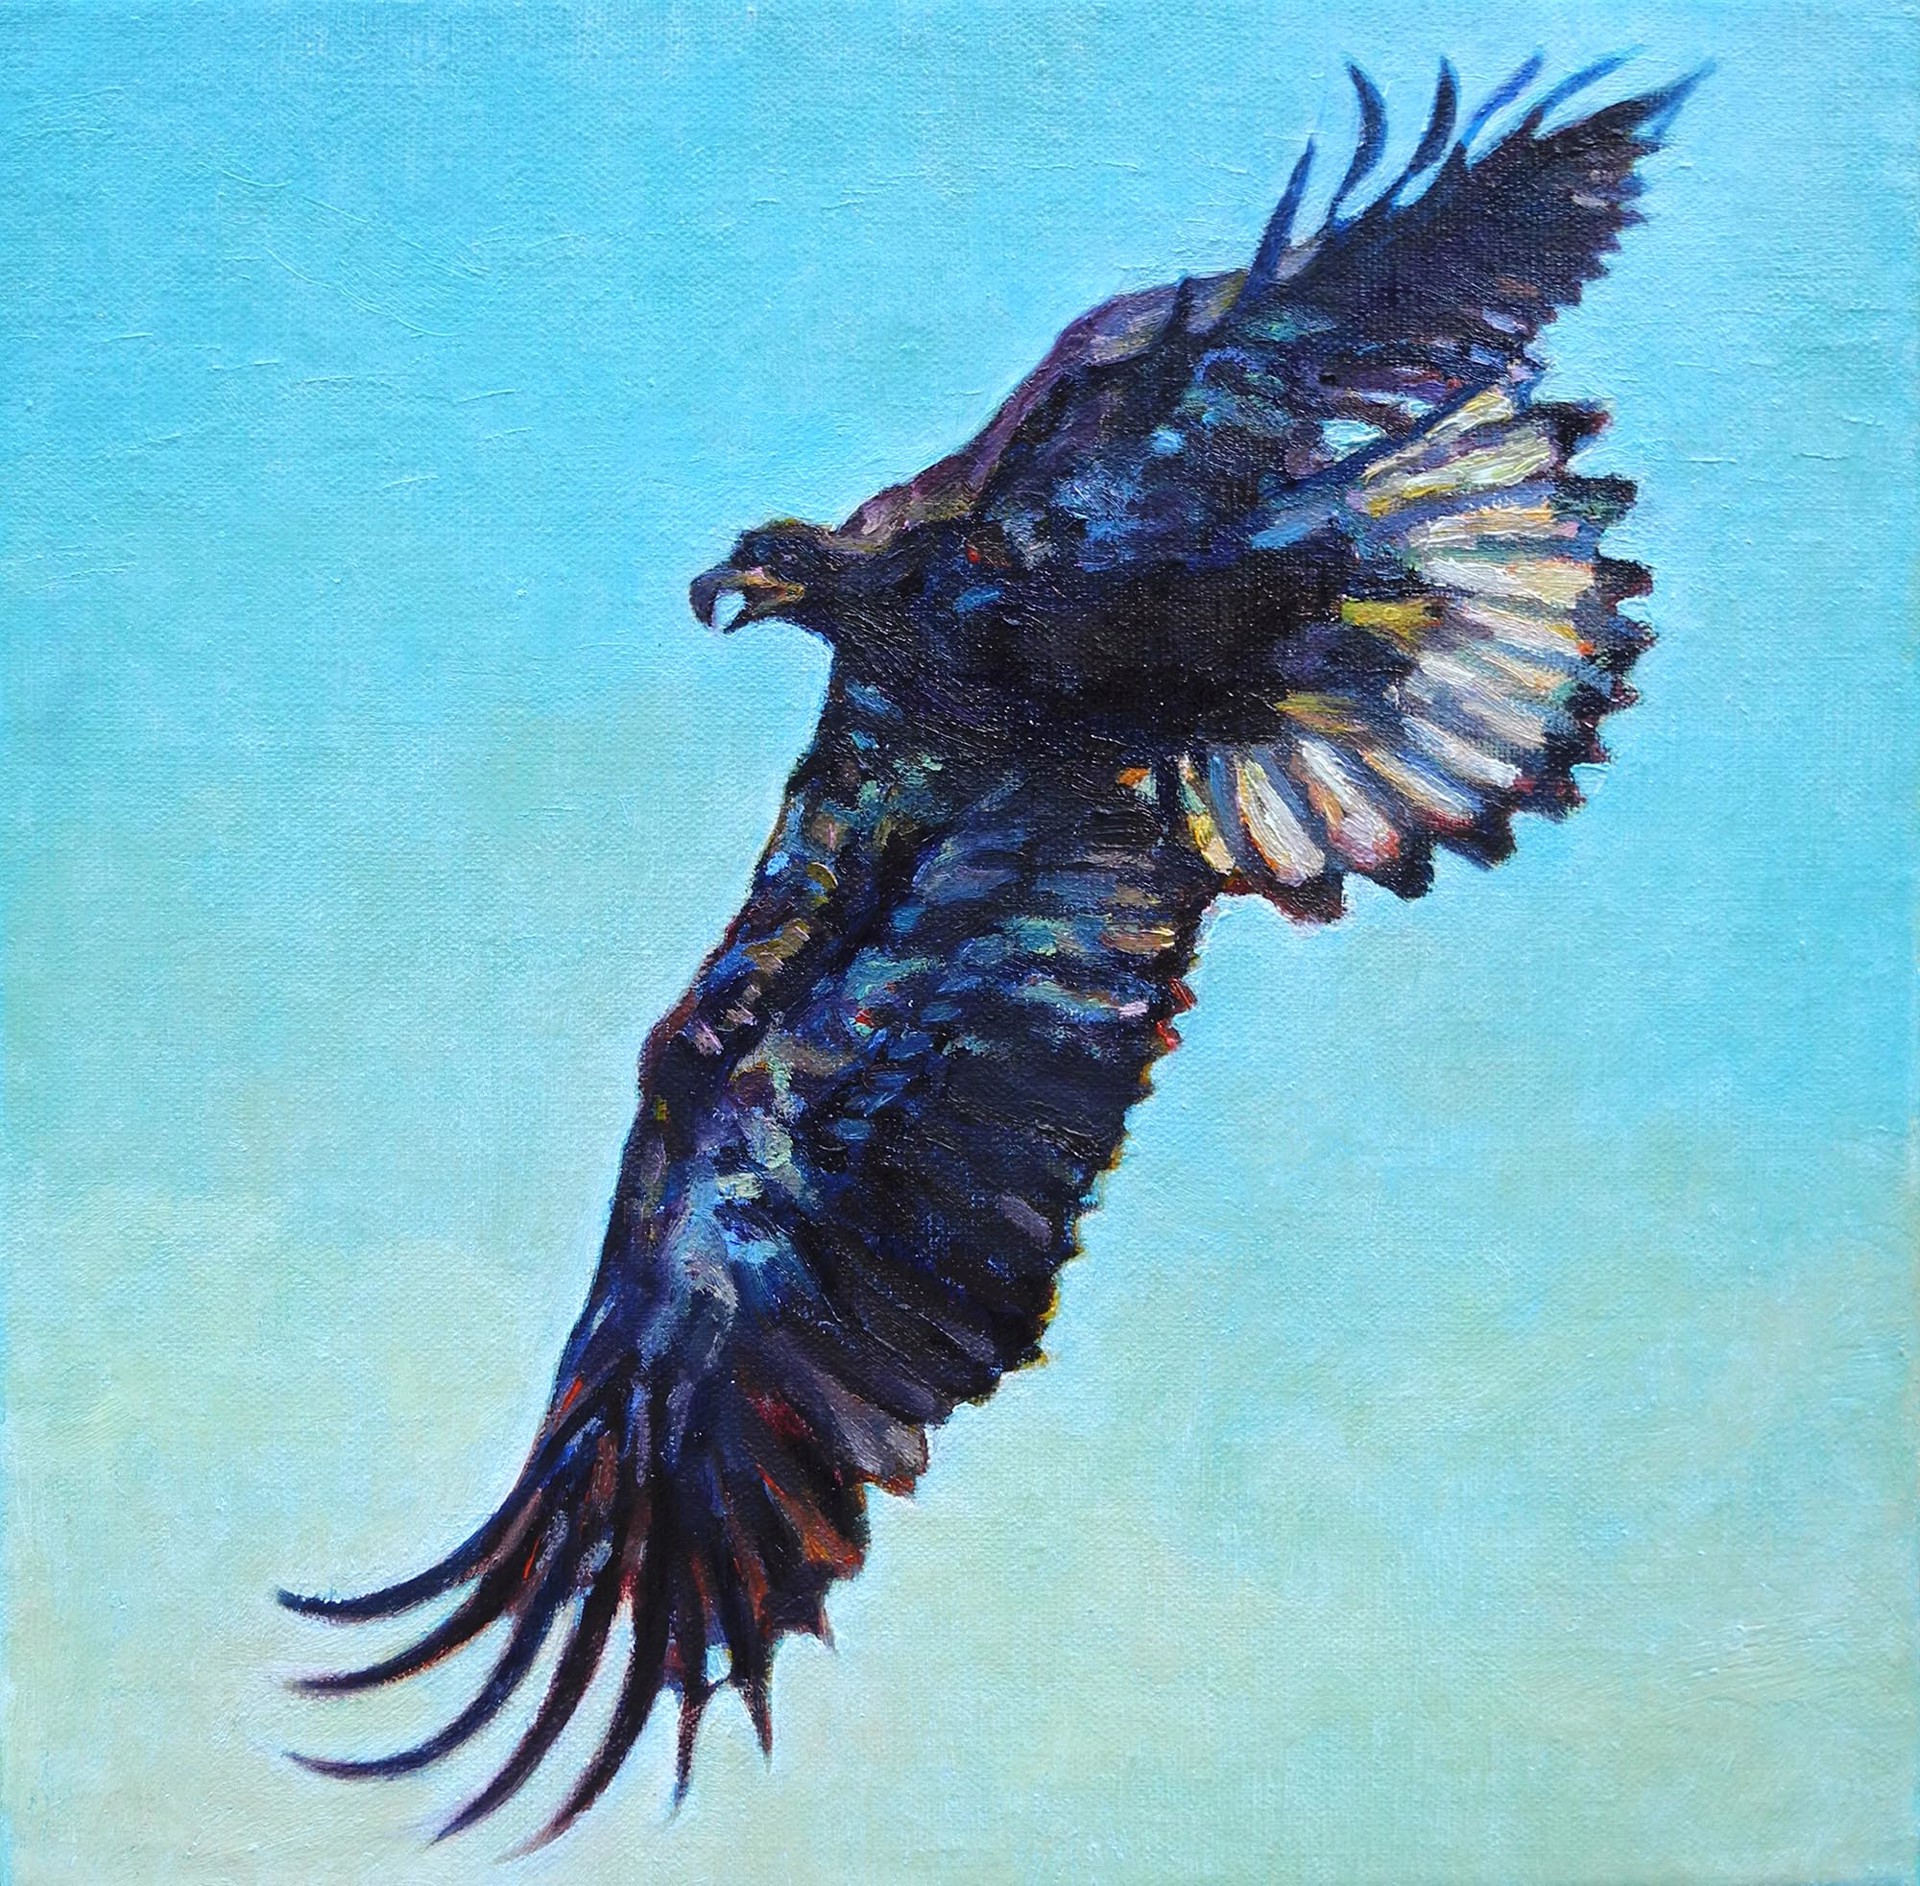 Original Oil Painting Featuring An Eagle In Flight Across Blue Gradient Background